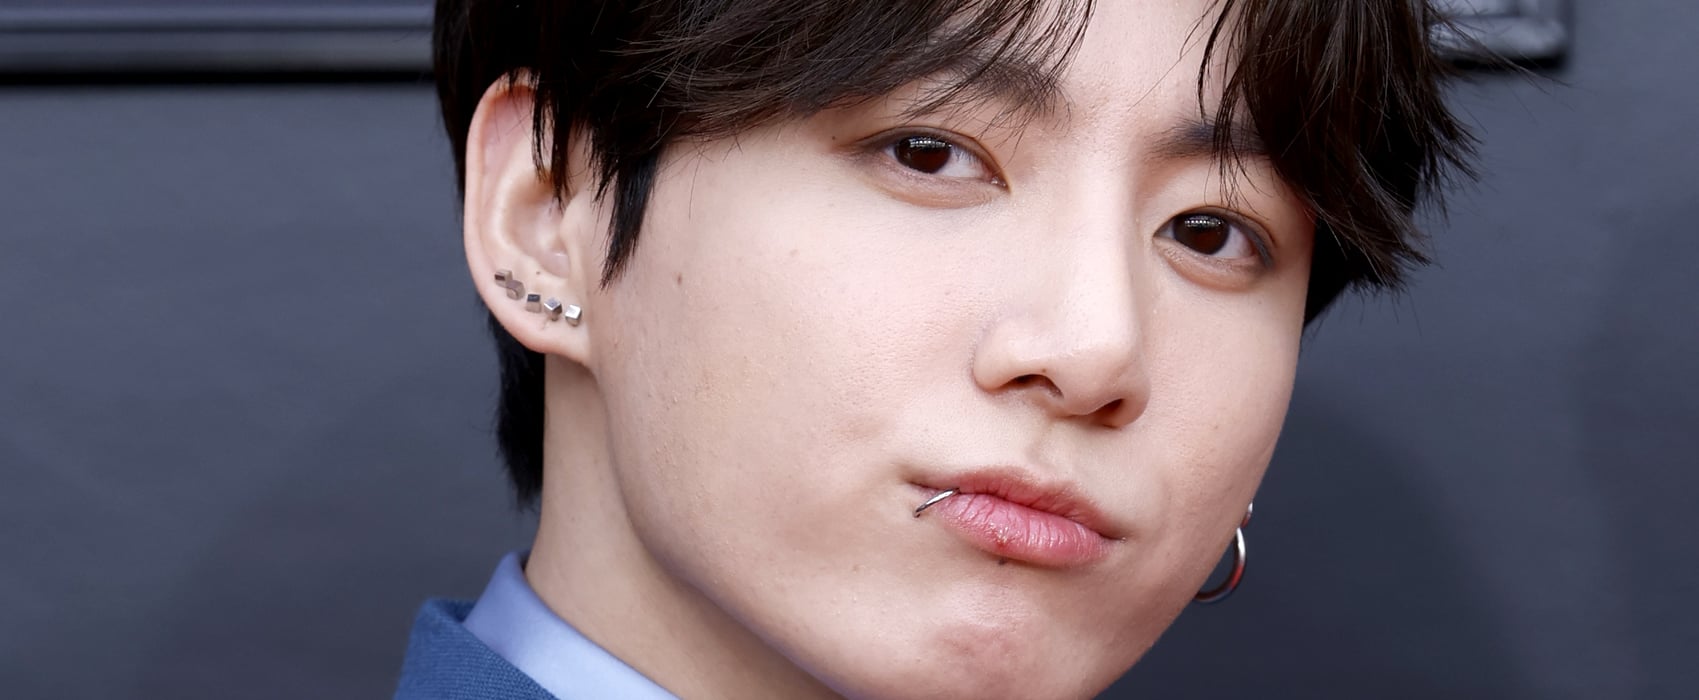 About Music on X: Jungkook of BTS in 'Seven': Monday, Tuesday, Wednesday  Thursday, Friday, Saturday, Sunday Monday, Tuesday, Wednesday Thursday,  Friday, seven days a week Every hour every minute every second, you